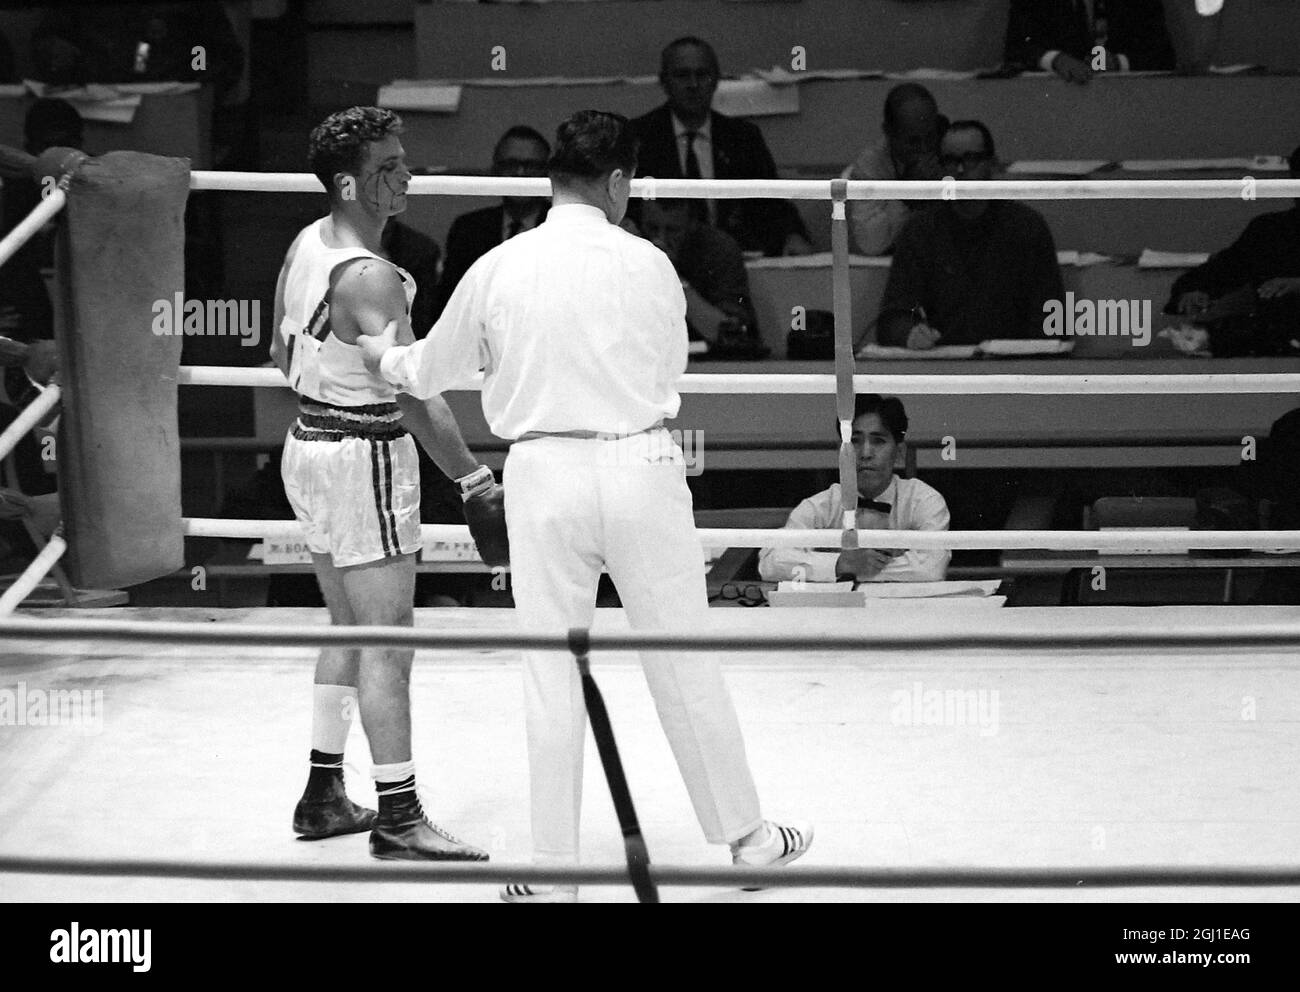 OLYMPICS, OLYMPIC SPORT GAMES - THE XVIII 18TH OLYMPIAD IN TOKYO, JAPAN - BOXING OLYMPICS LIGHT MIDDLE REF STOPS BARBER V GONZALES  ;  21 OCTOBER 1964 Stock Photo